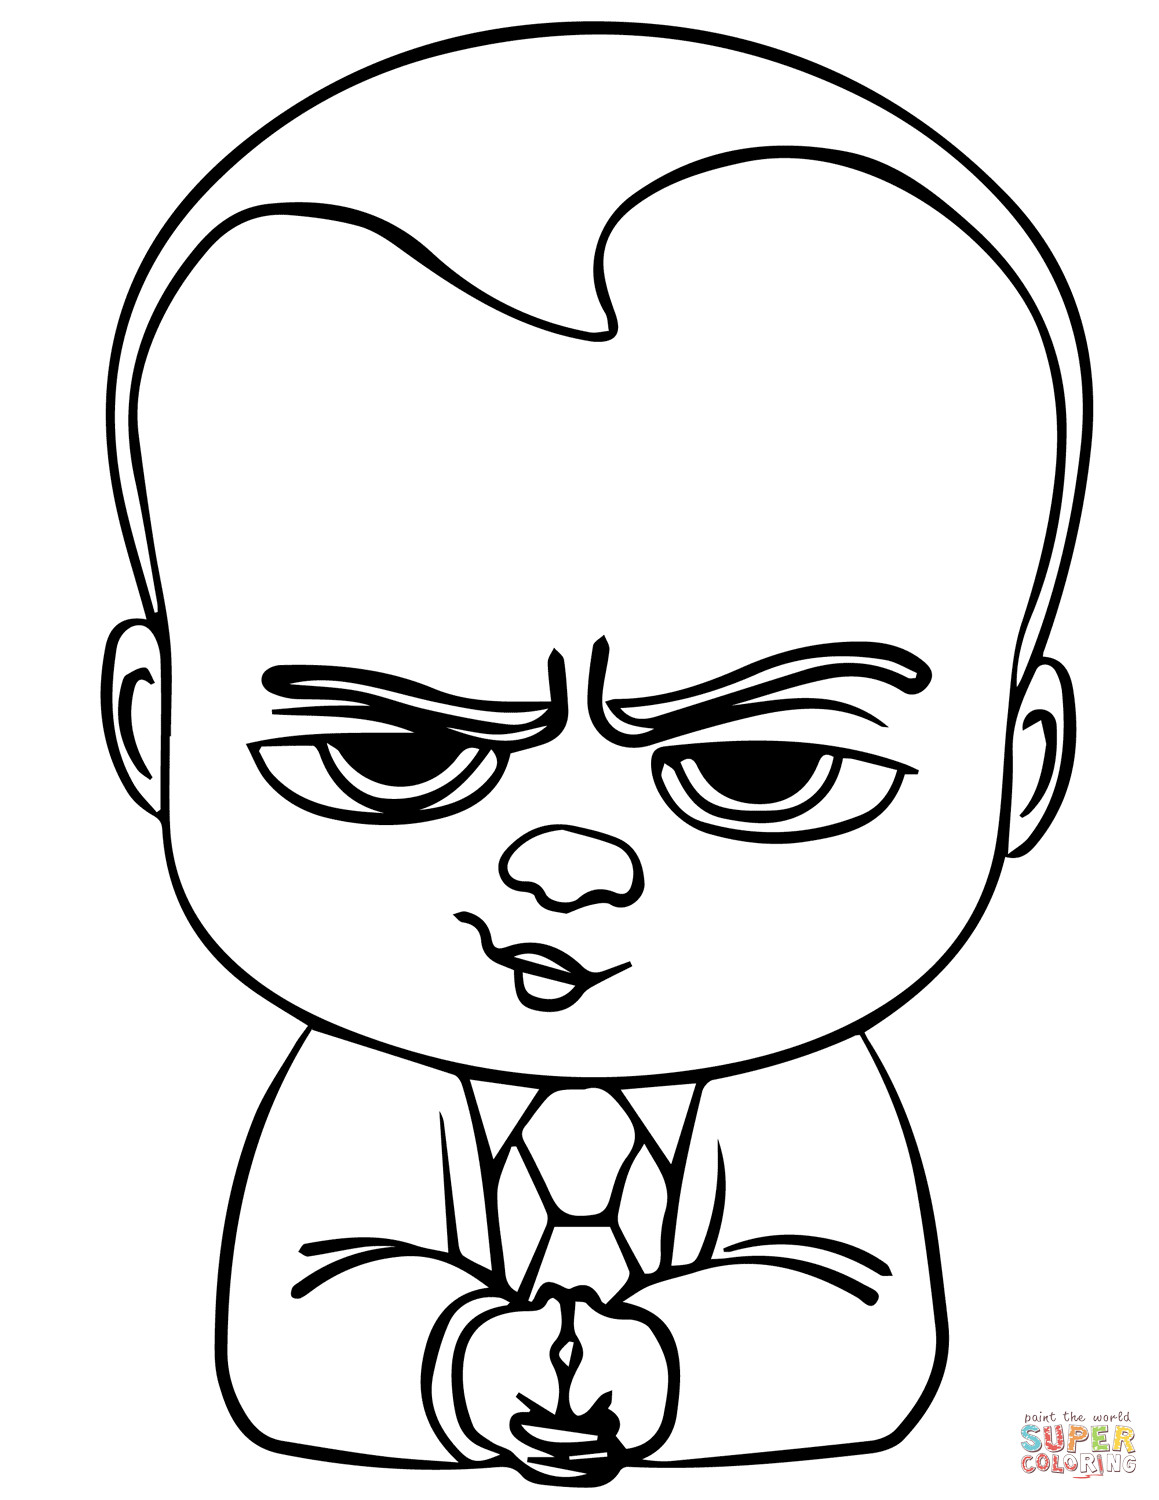 Boss Baby Coloring Pages
 The Boss Baby coloring page